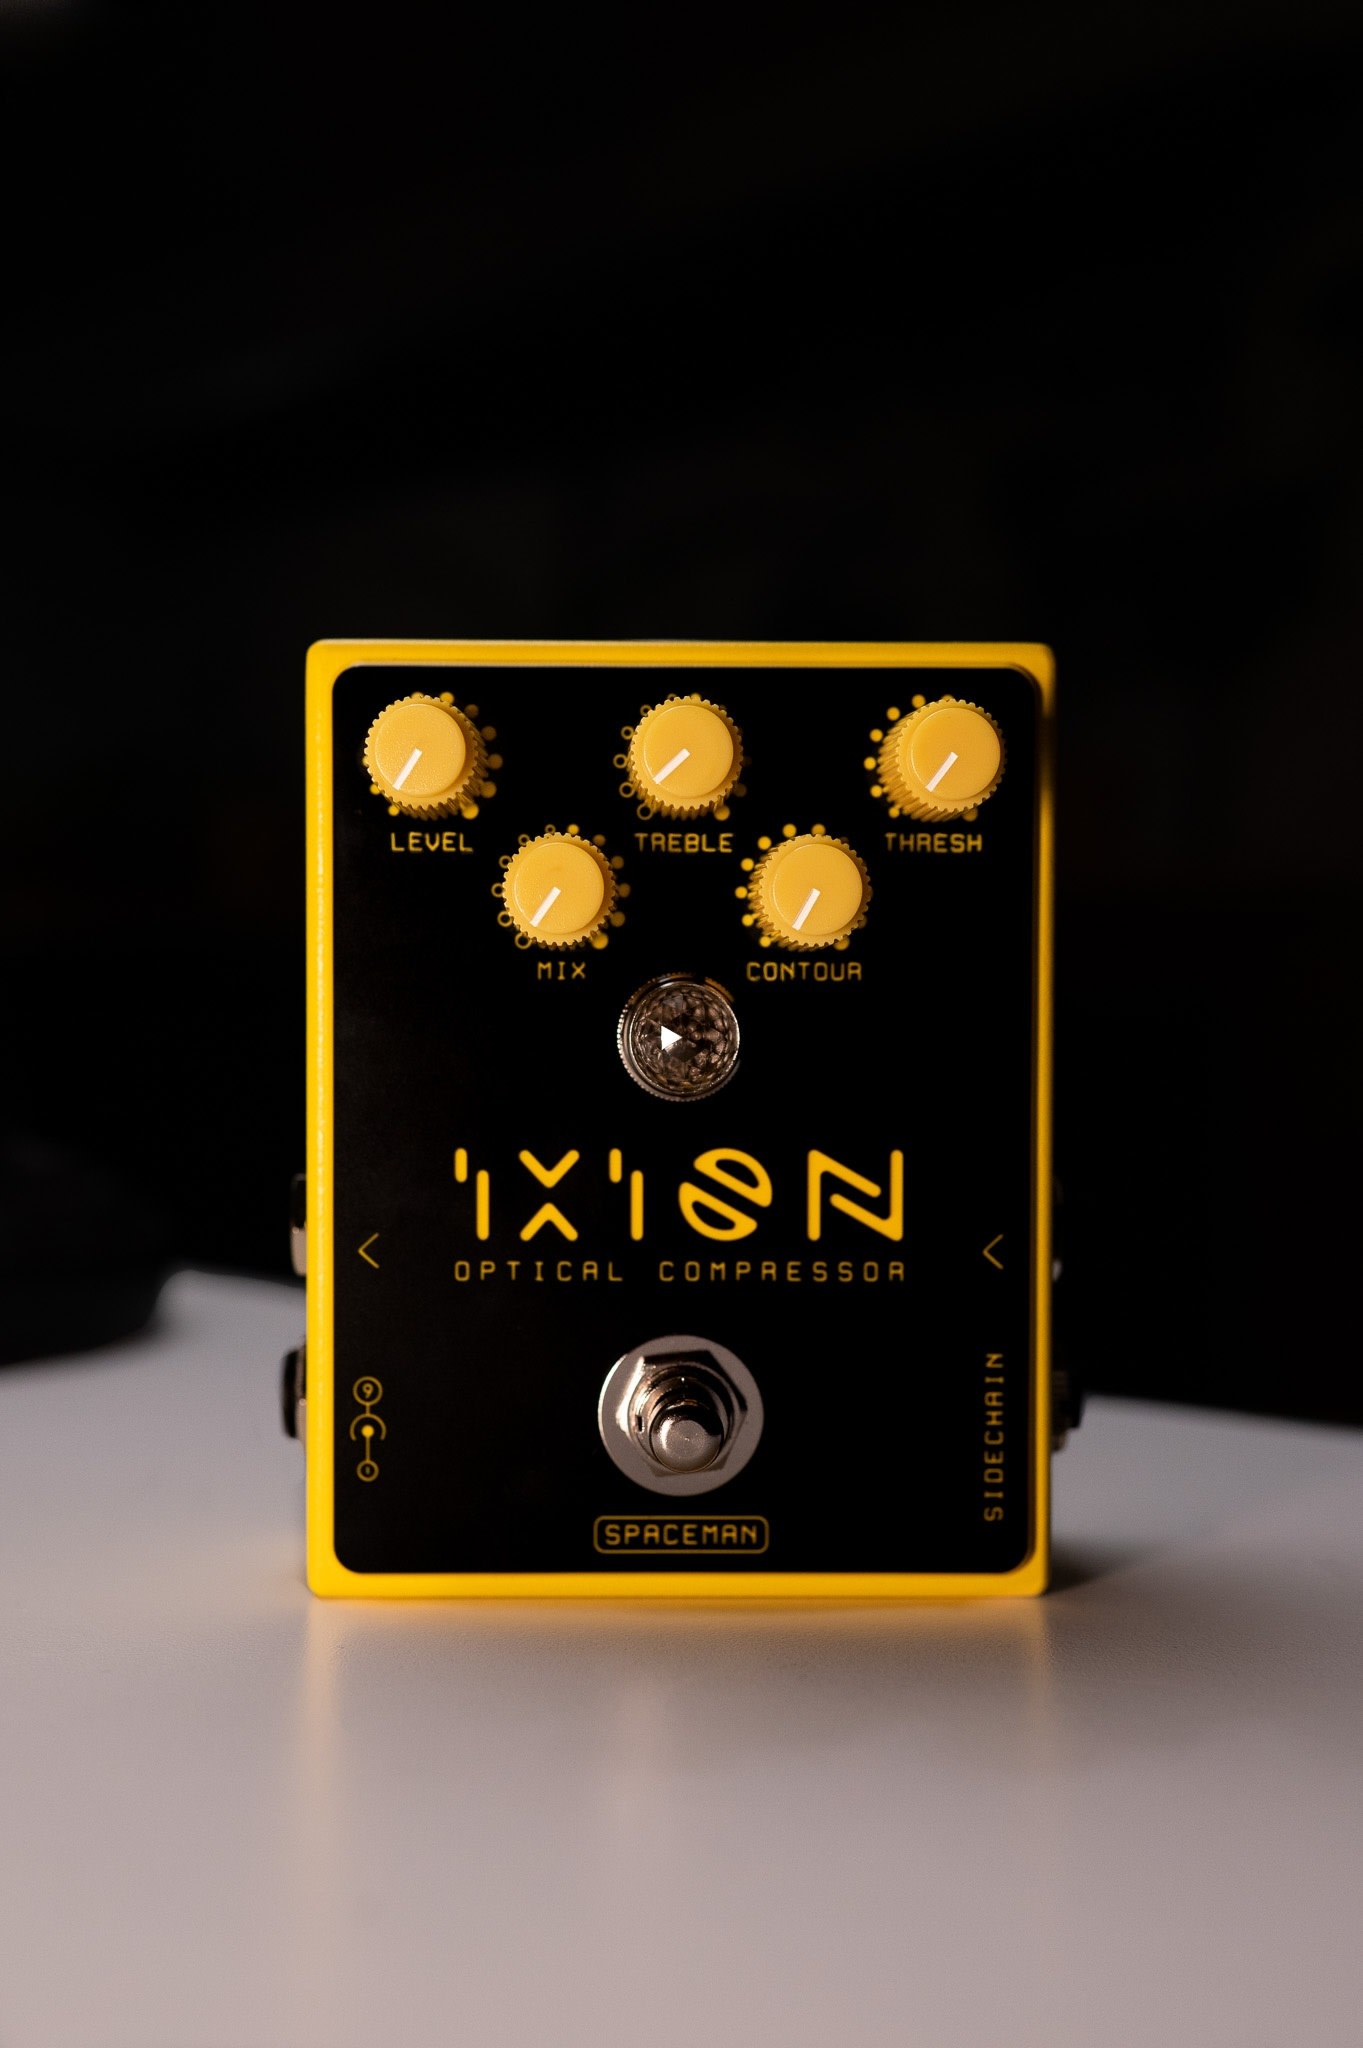 Ixion - Optical Photocell Compressor - Spaceman Effects